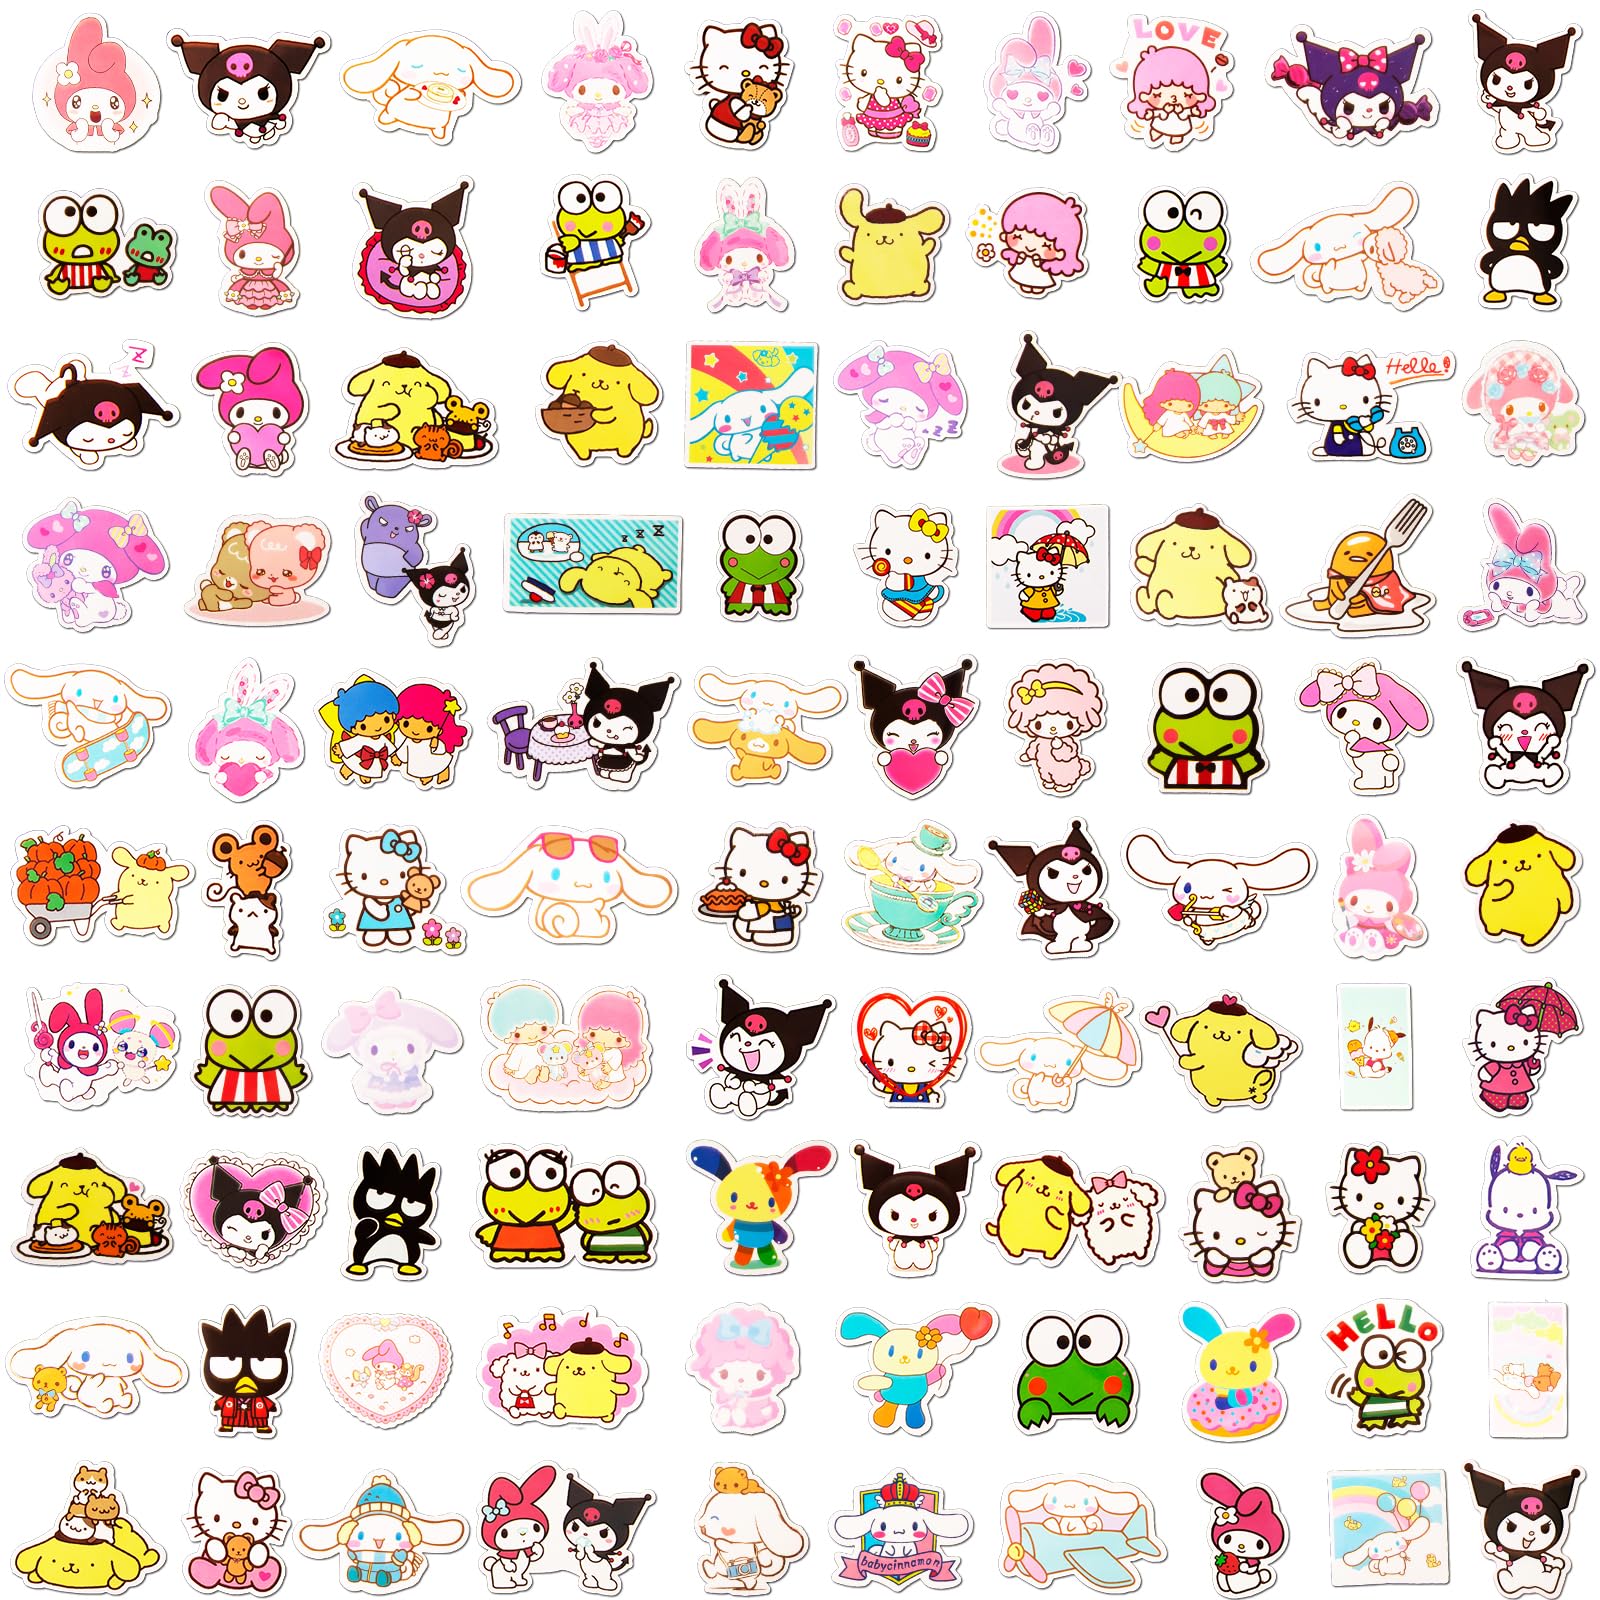 100PCS Vinyl Stickers for Kids, Kawaii Kurromi Stickers Waterproof Stickers, Non-Repeating Guitar Laptop Suitcase Stickers, Best Anime Sticker for Fans, Kids, Teens